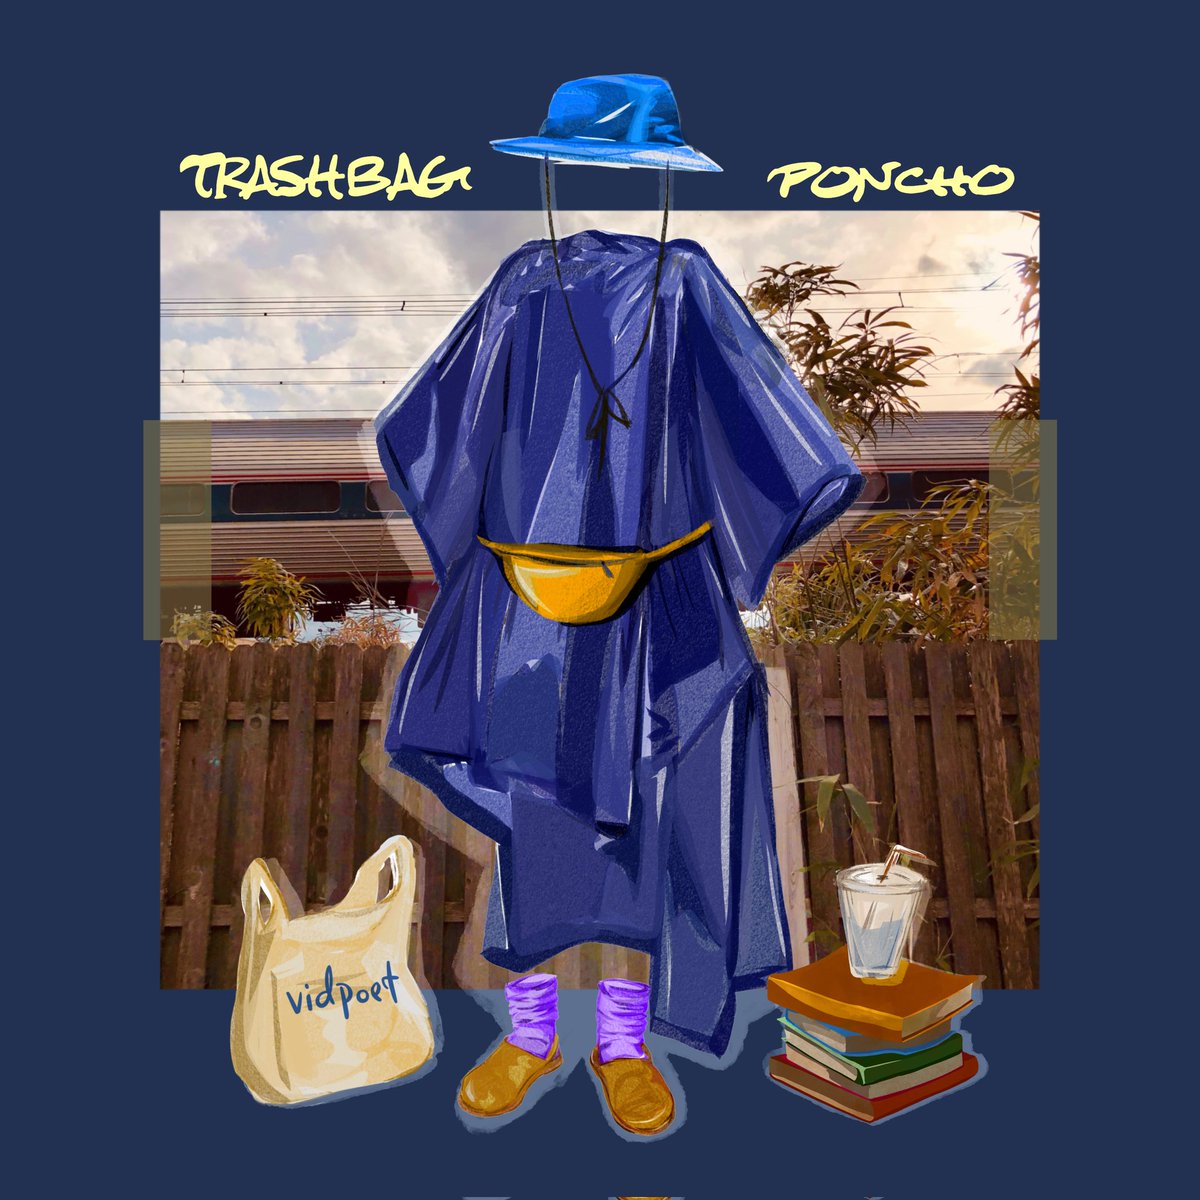 Listen to the album 'Trashbag Poncho' and appreciate the awesome new work from vidpoet. 
#indiedockmusicblog #albumreview #electronic #experimental #avantgarde #cinematic

indiedockmusicblog.co.uk/?p=23108&fbcli…